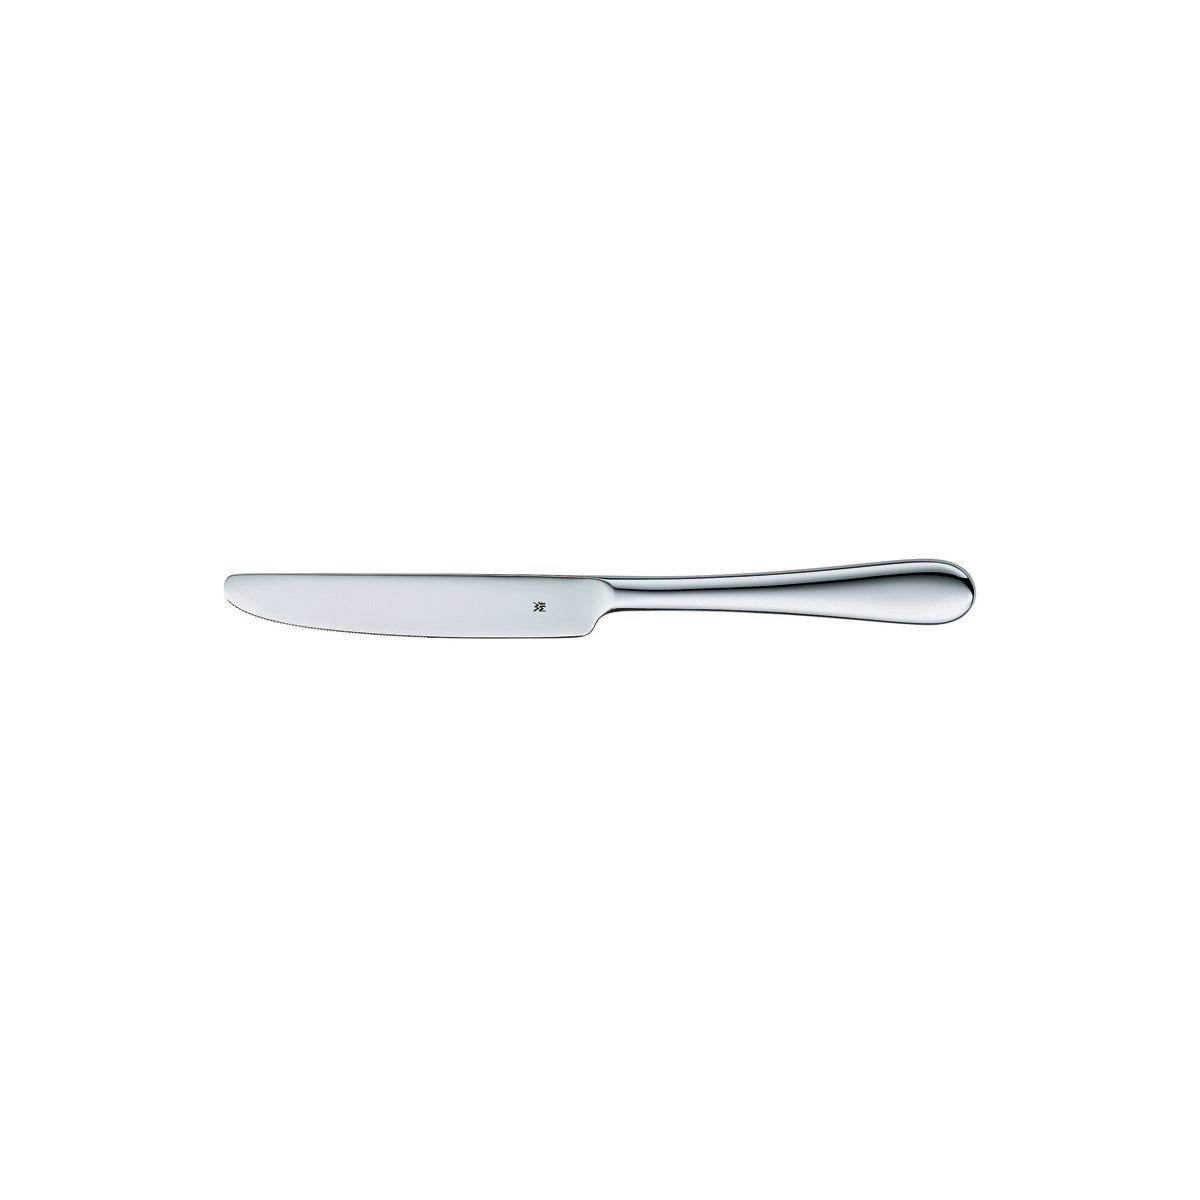 10.1903.6067 WMF Signum Table Knife - Hollow Handle Silverplated Tomkin Australia Hospitality Supplies